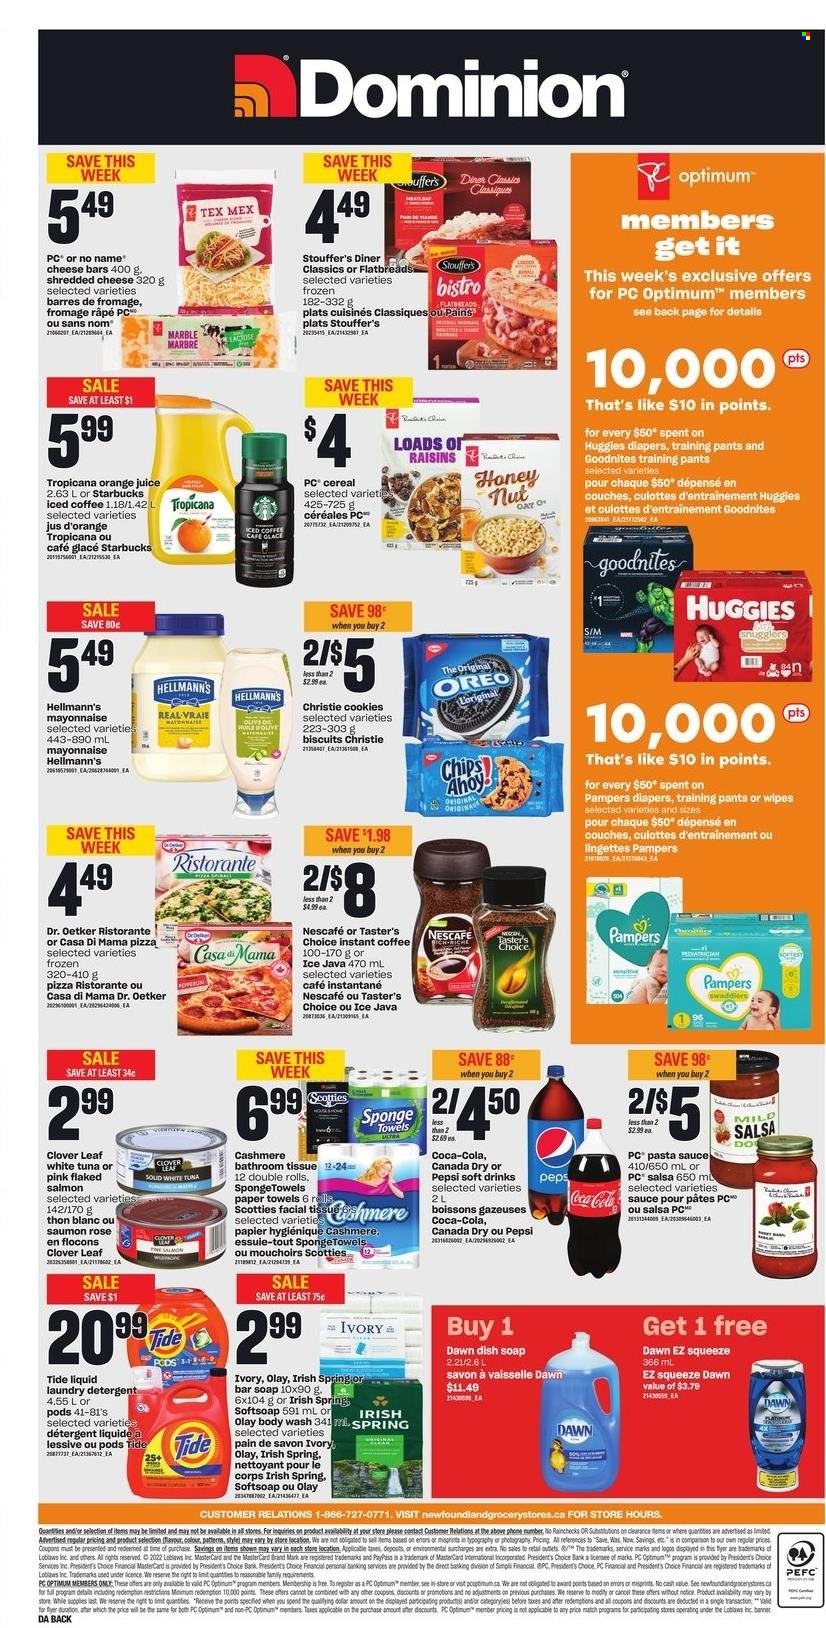 thumbnail - Dominion Flyer - May 19, 2022 - May 25, 2022 - Sales products - salmon, tuna, No Name, pizza, pasta sauce, sauce, shredded cheese, Dr. Oetker, Président, Clover, mayonnaise, Hellmann’s, Stouffer's, cookies, biscuit, oats, cereals, salsa, Canada Dry, Coca-Cola, Pepsi, orange juice, juice, soft drink, iced coffee, instant coffee, Starbucks, rosé wine, wipes, pants, nappies, baby pants, bath tissue, kitchen towels, paper towels, Tide, laundry detergent, body wash, Softsoap, soap bar, soap, Olay, sponge, Optimum, phone, rose, detergent, Huggies, Pampers, Oreo, Nescafé. Page 2.